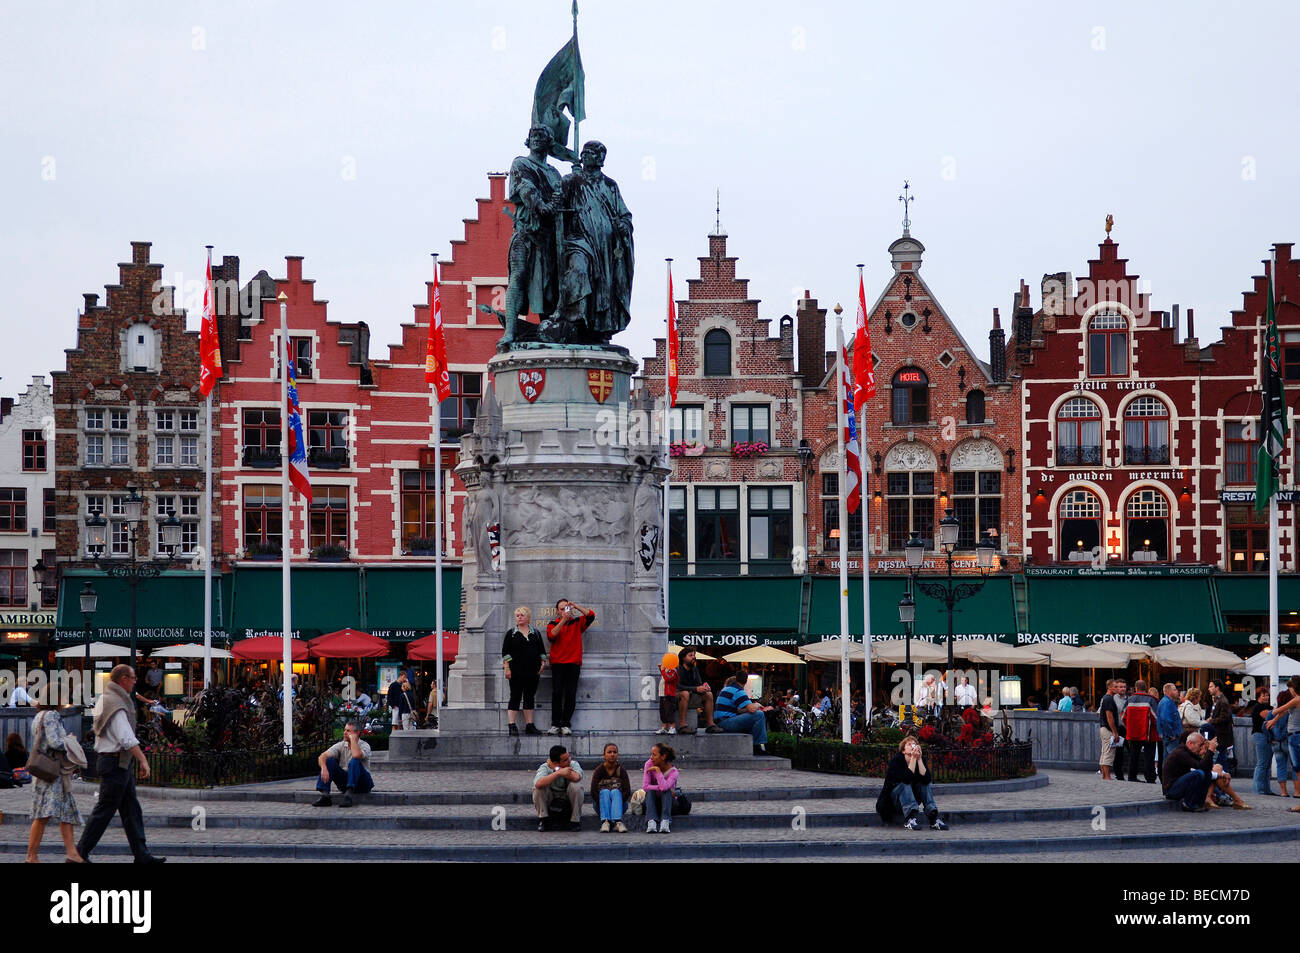 Freedom fighter monument, in the back houses with stepped gables and restaurants, Market Square, Bruges, Belgium, Europe Stock Photo